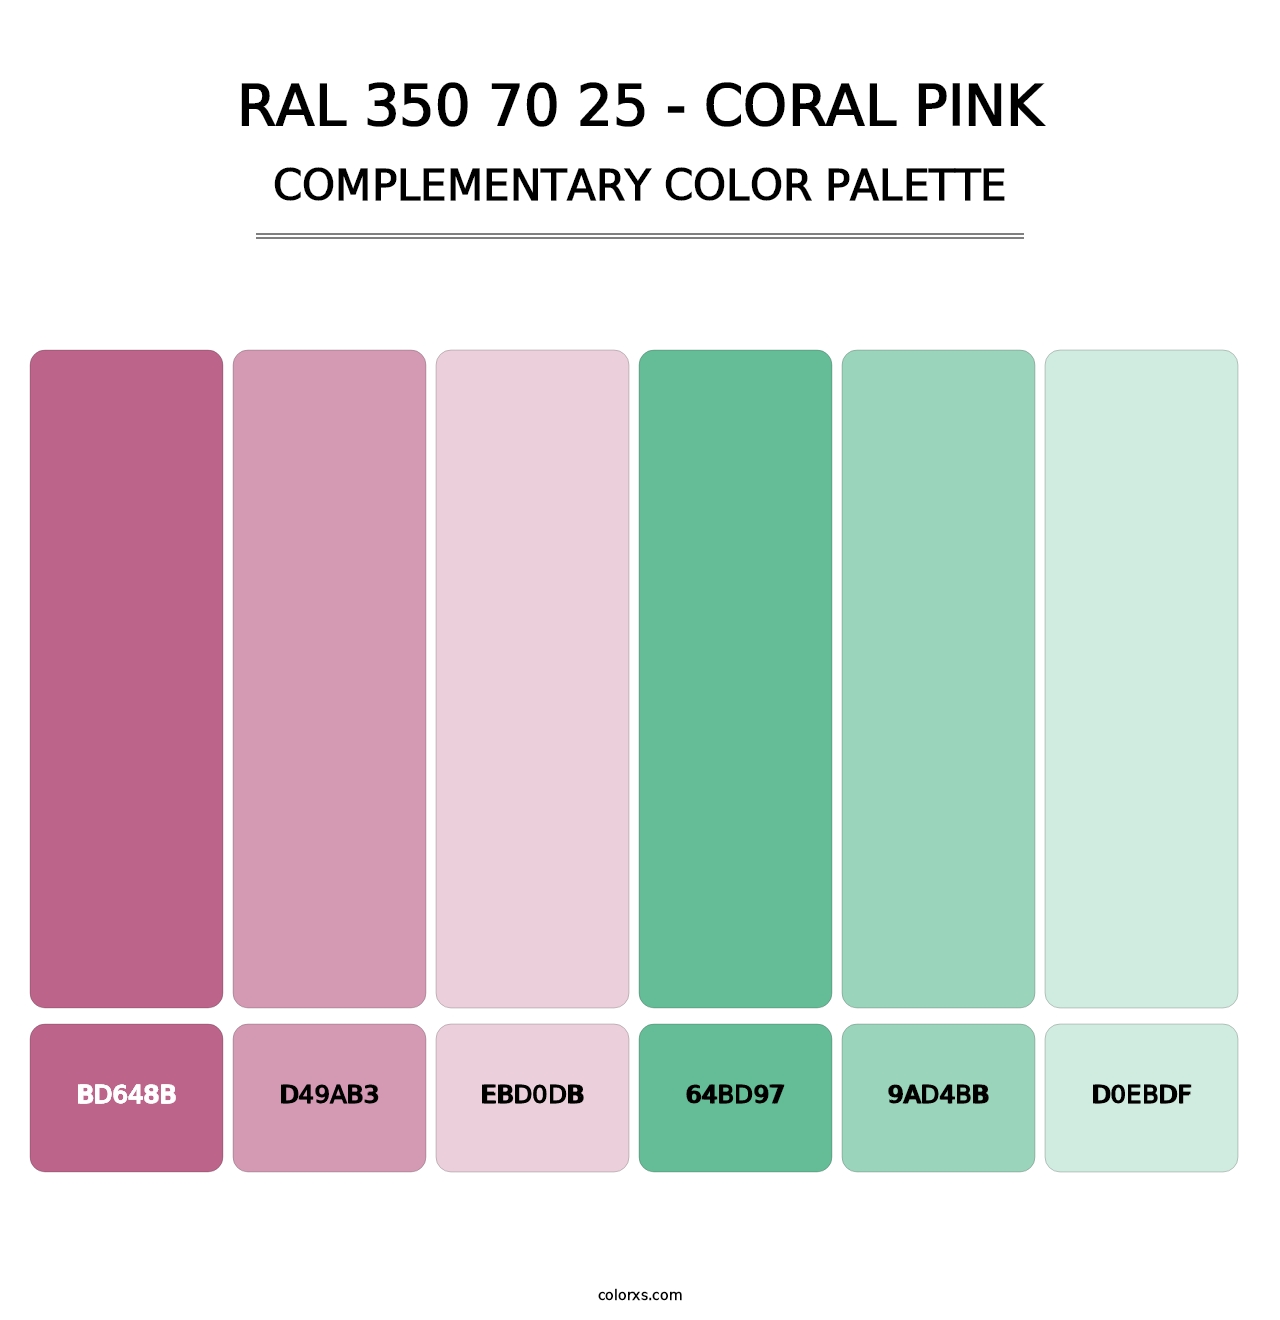 RAL 350 70 25 - Coral Pink - Complementary Color Palette